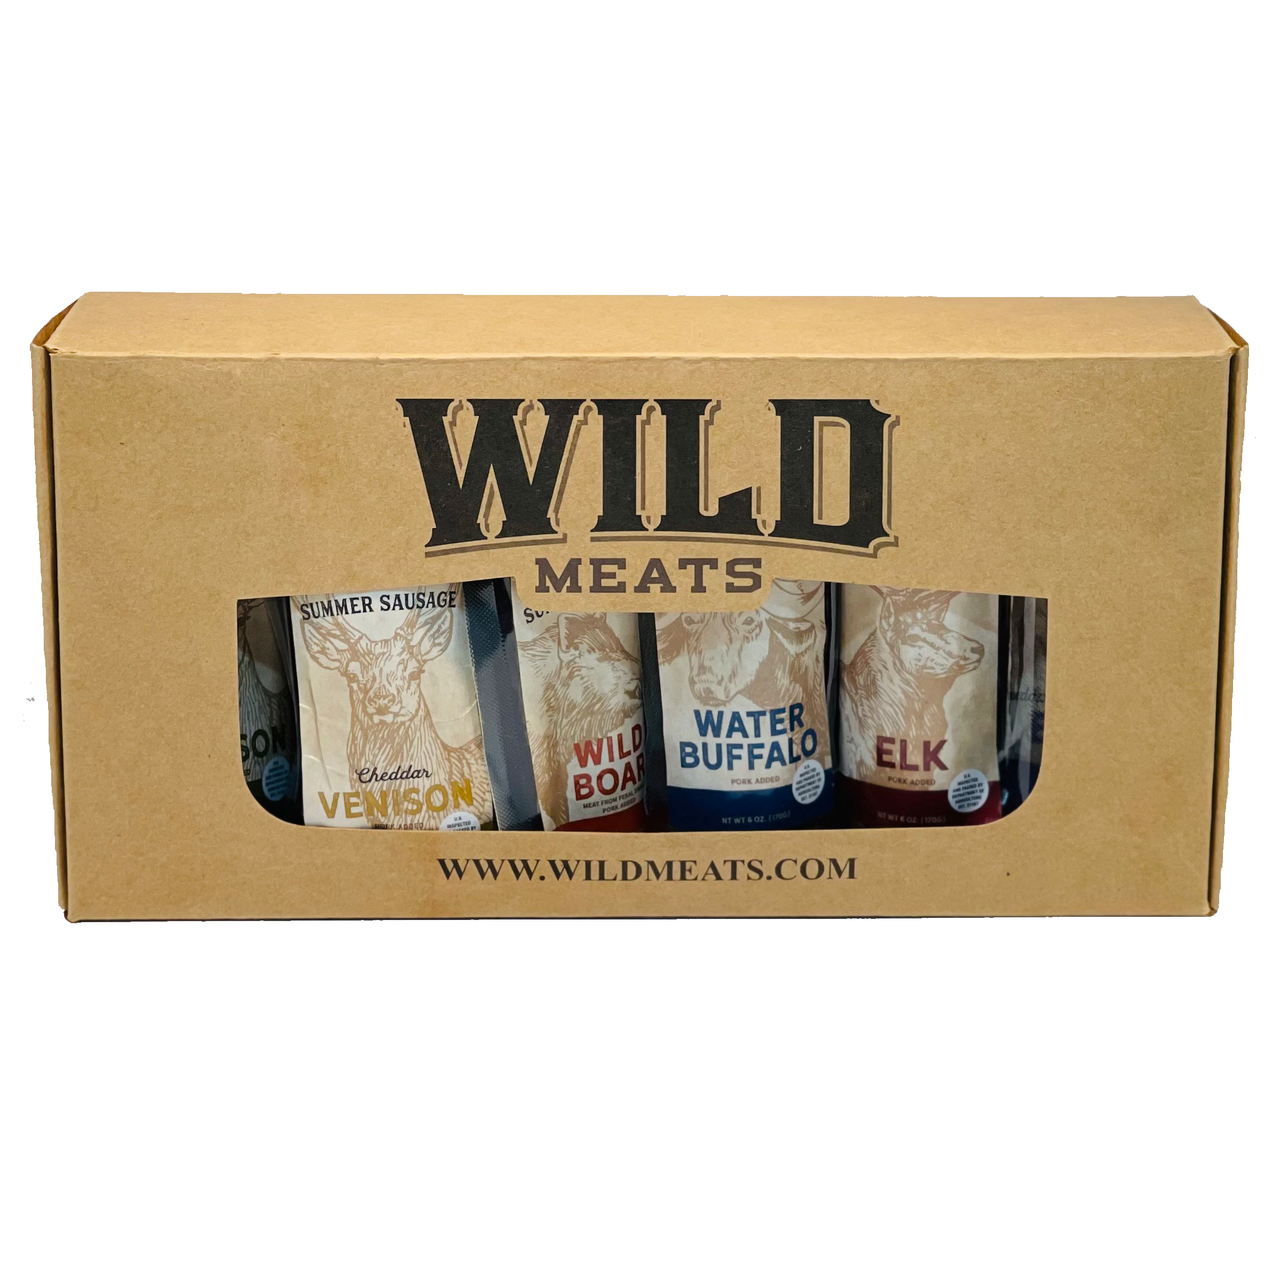 Smoked Meat Lover's Gift Box